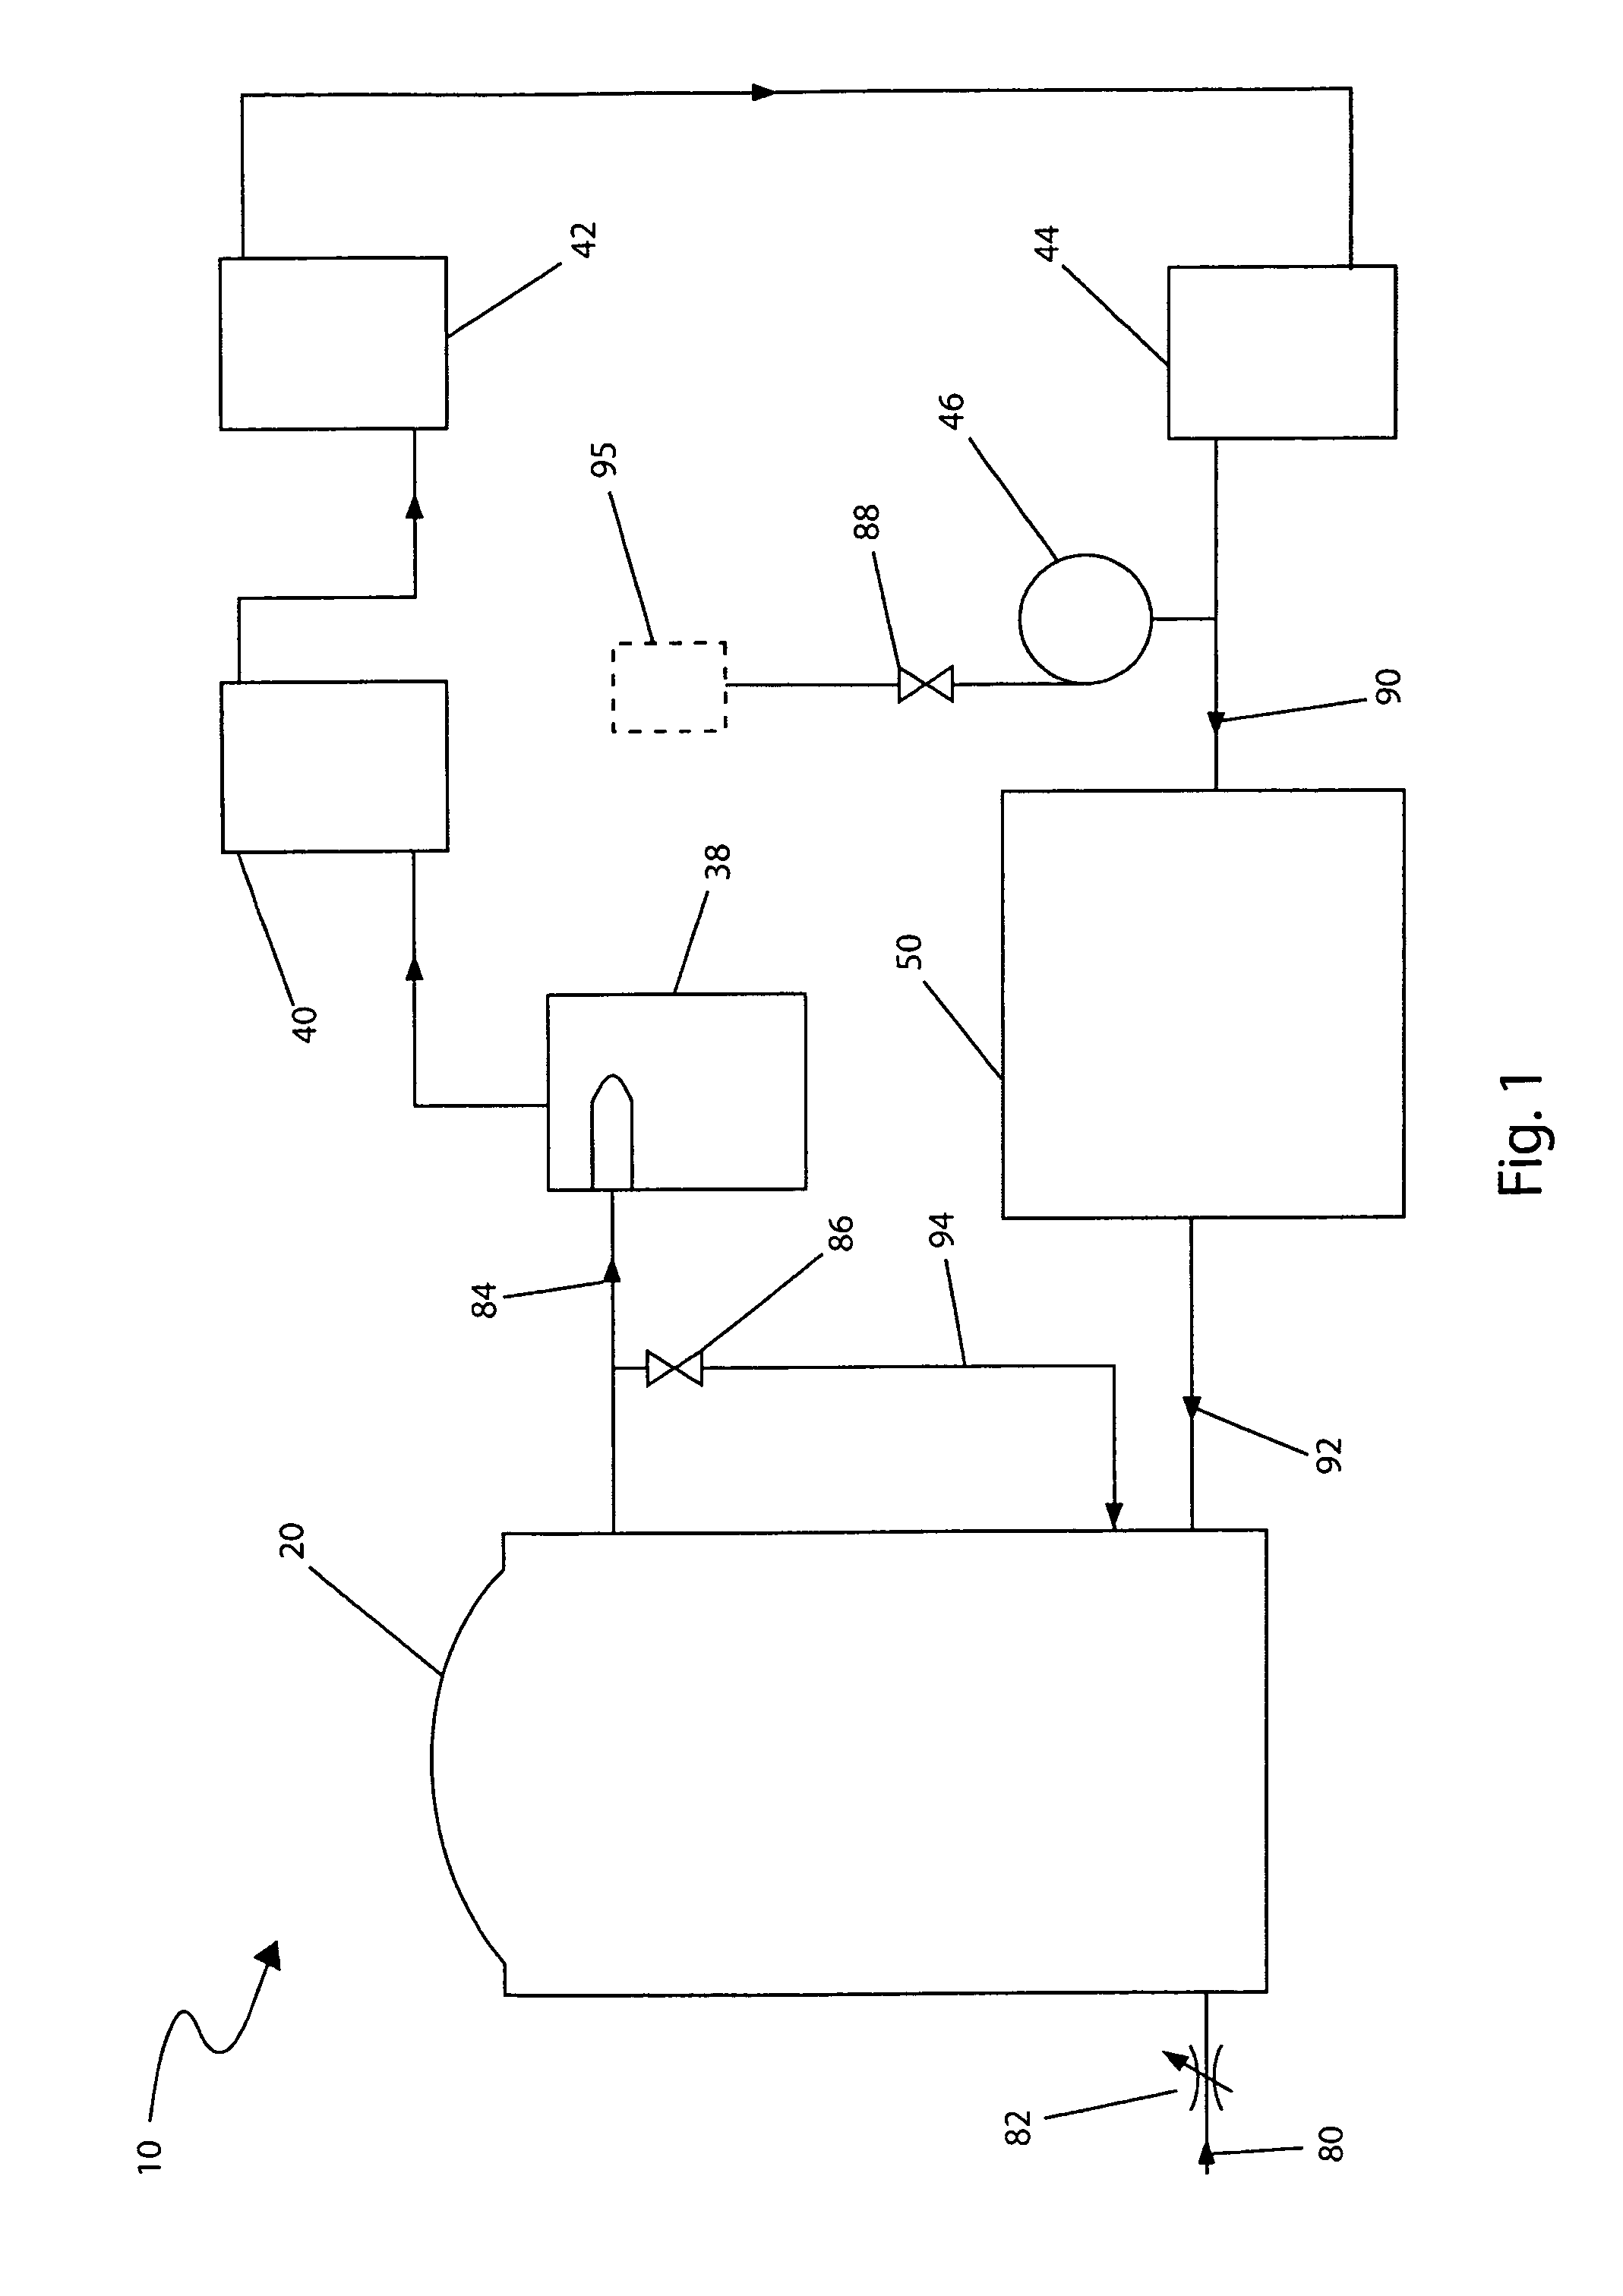 Method and system for recycling flue gas